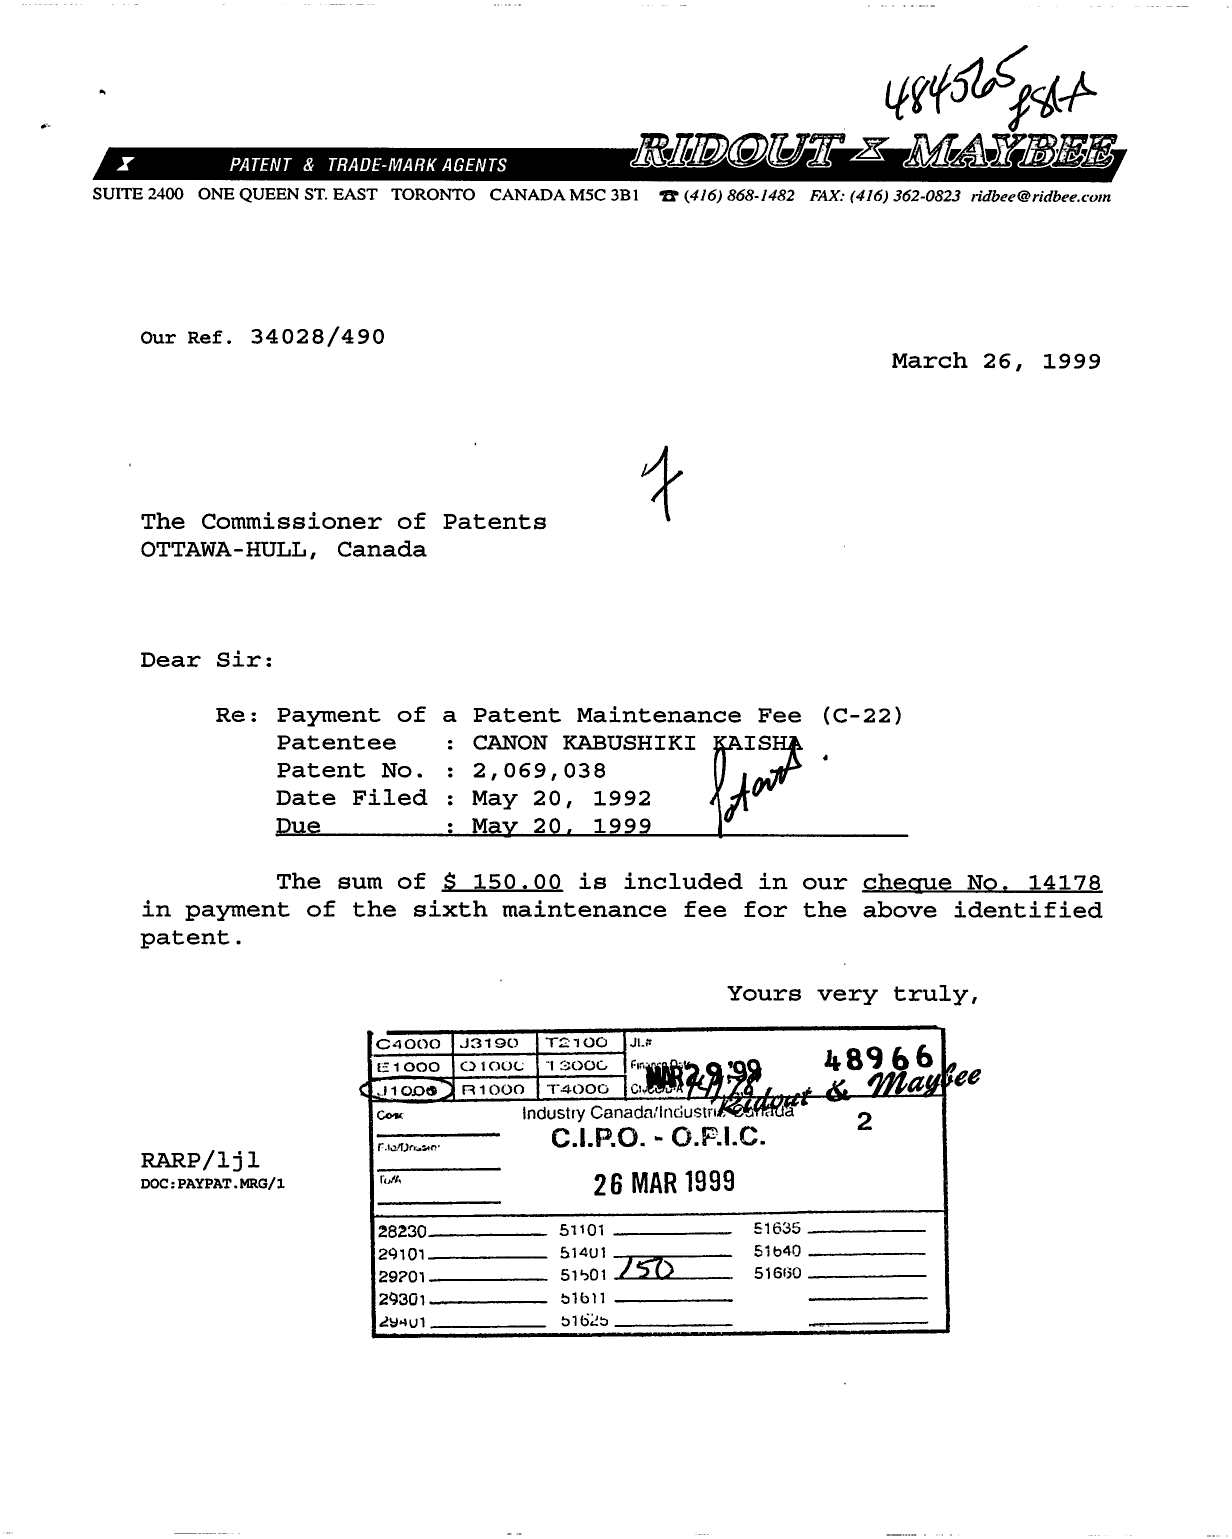 Canadian Patent Document 2069038. Fees 19990326. Image 1 of 1